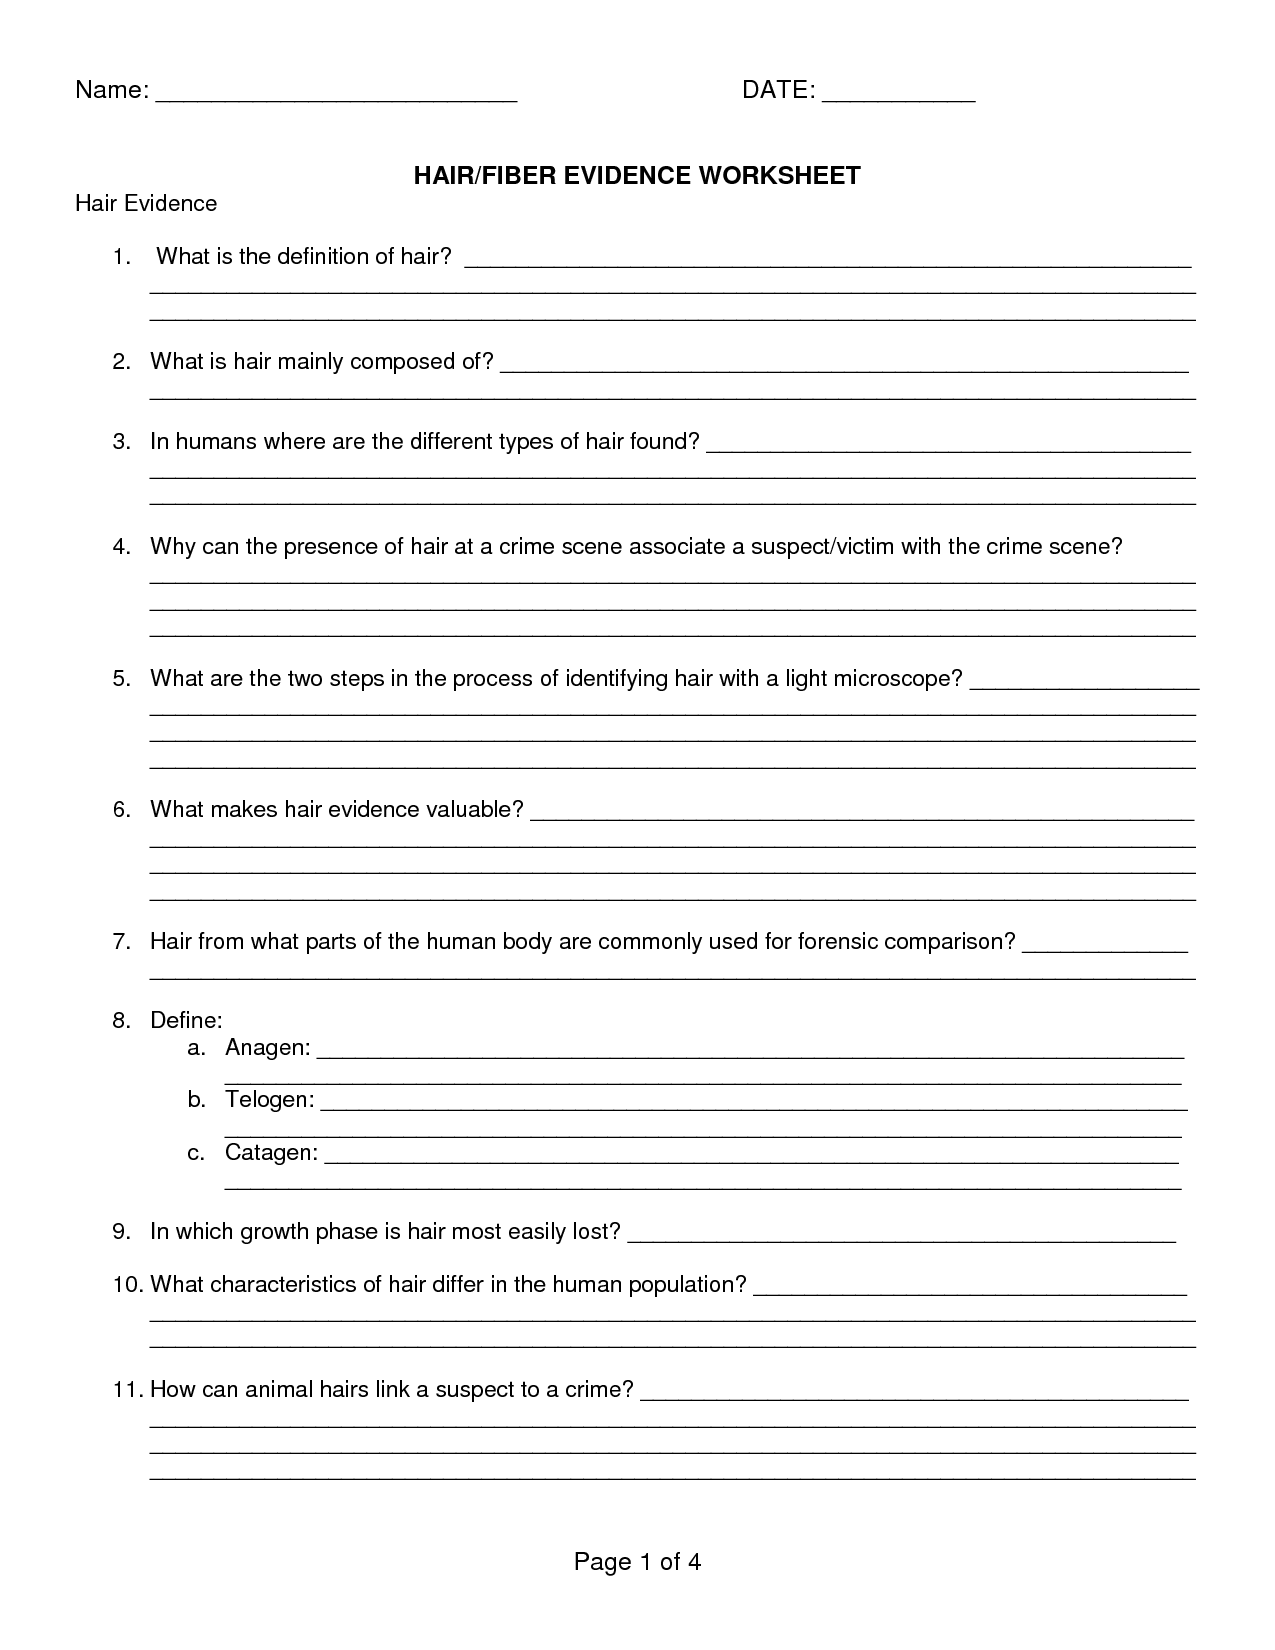 14 Best Images Of Hair Evidence Worksheet Activity Forensic Science 